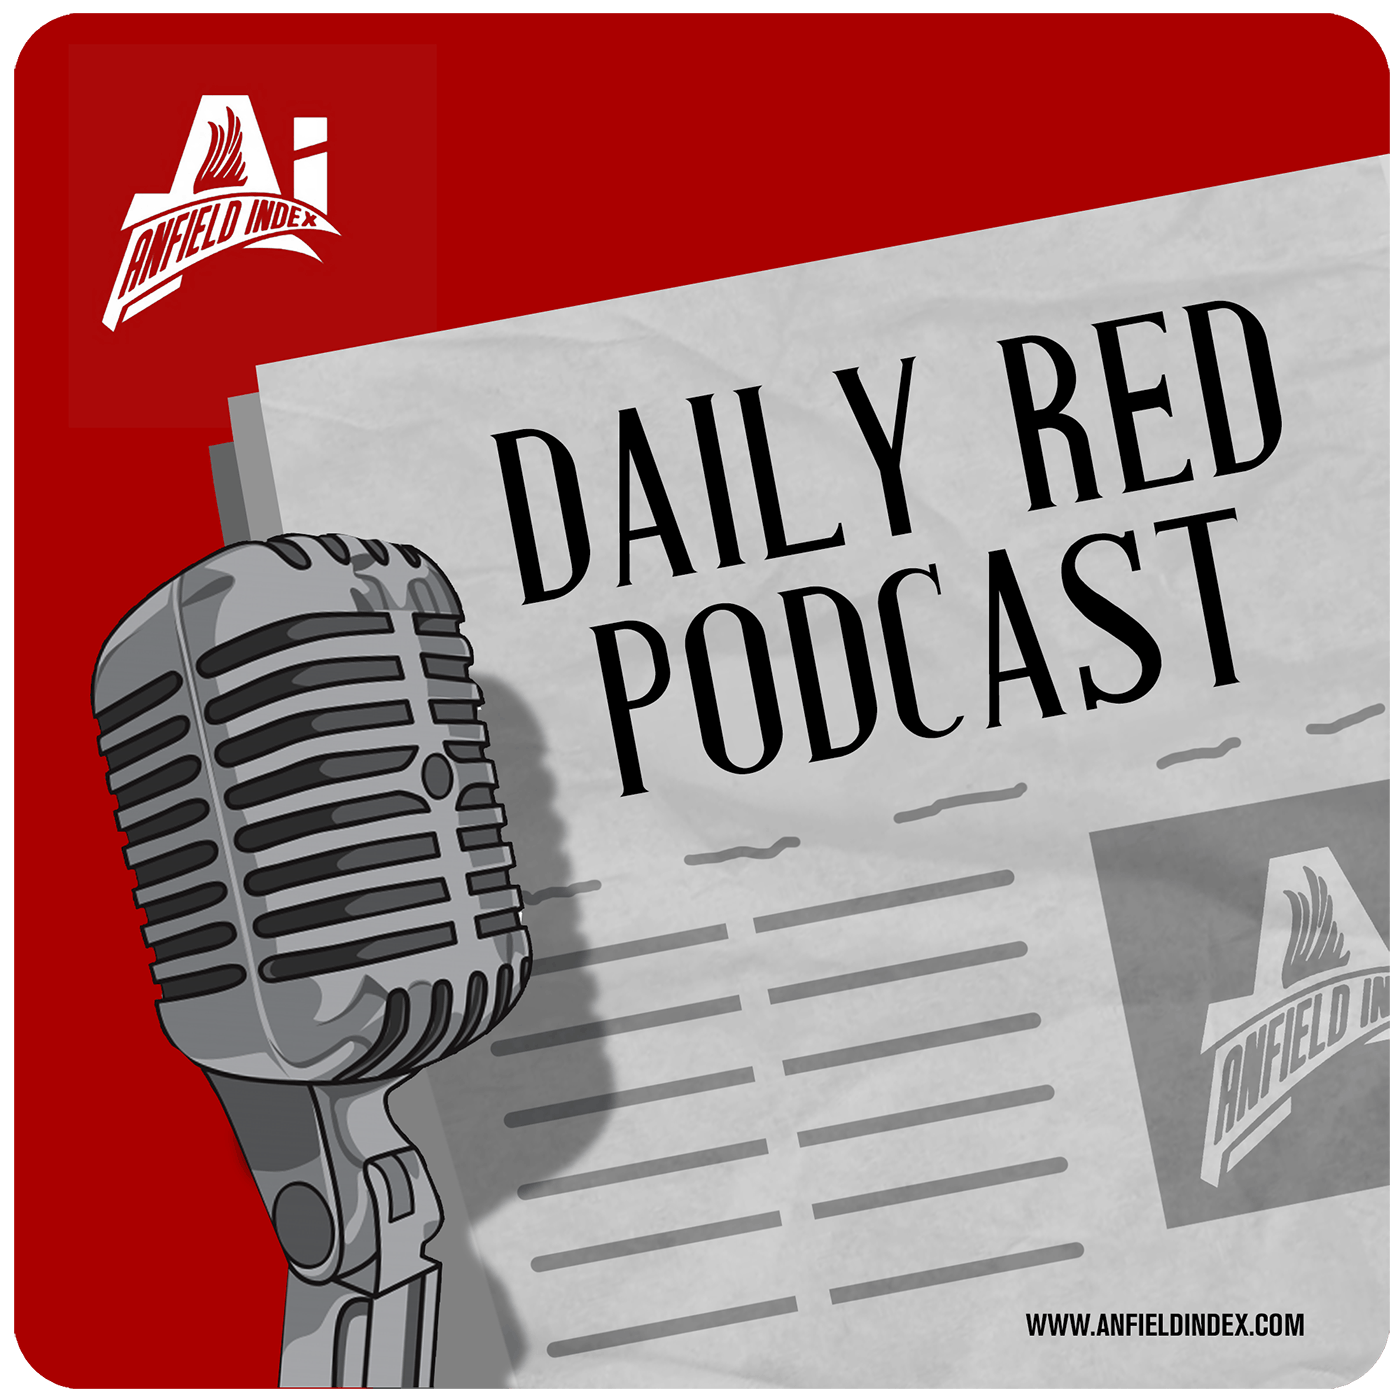 The Road Ahead! - Daily Red Podcast